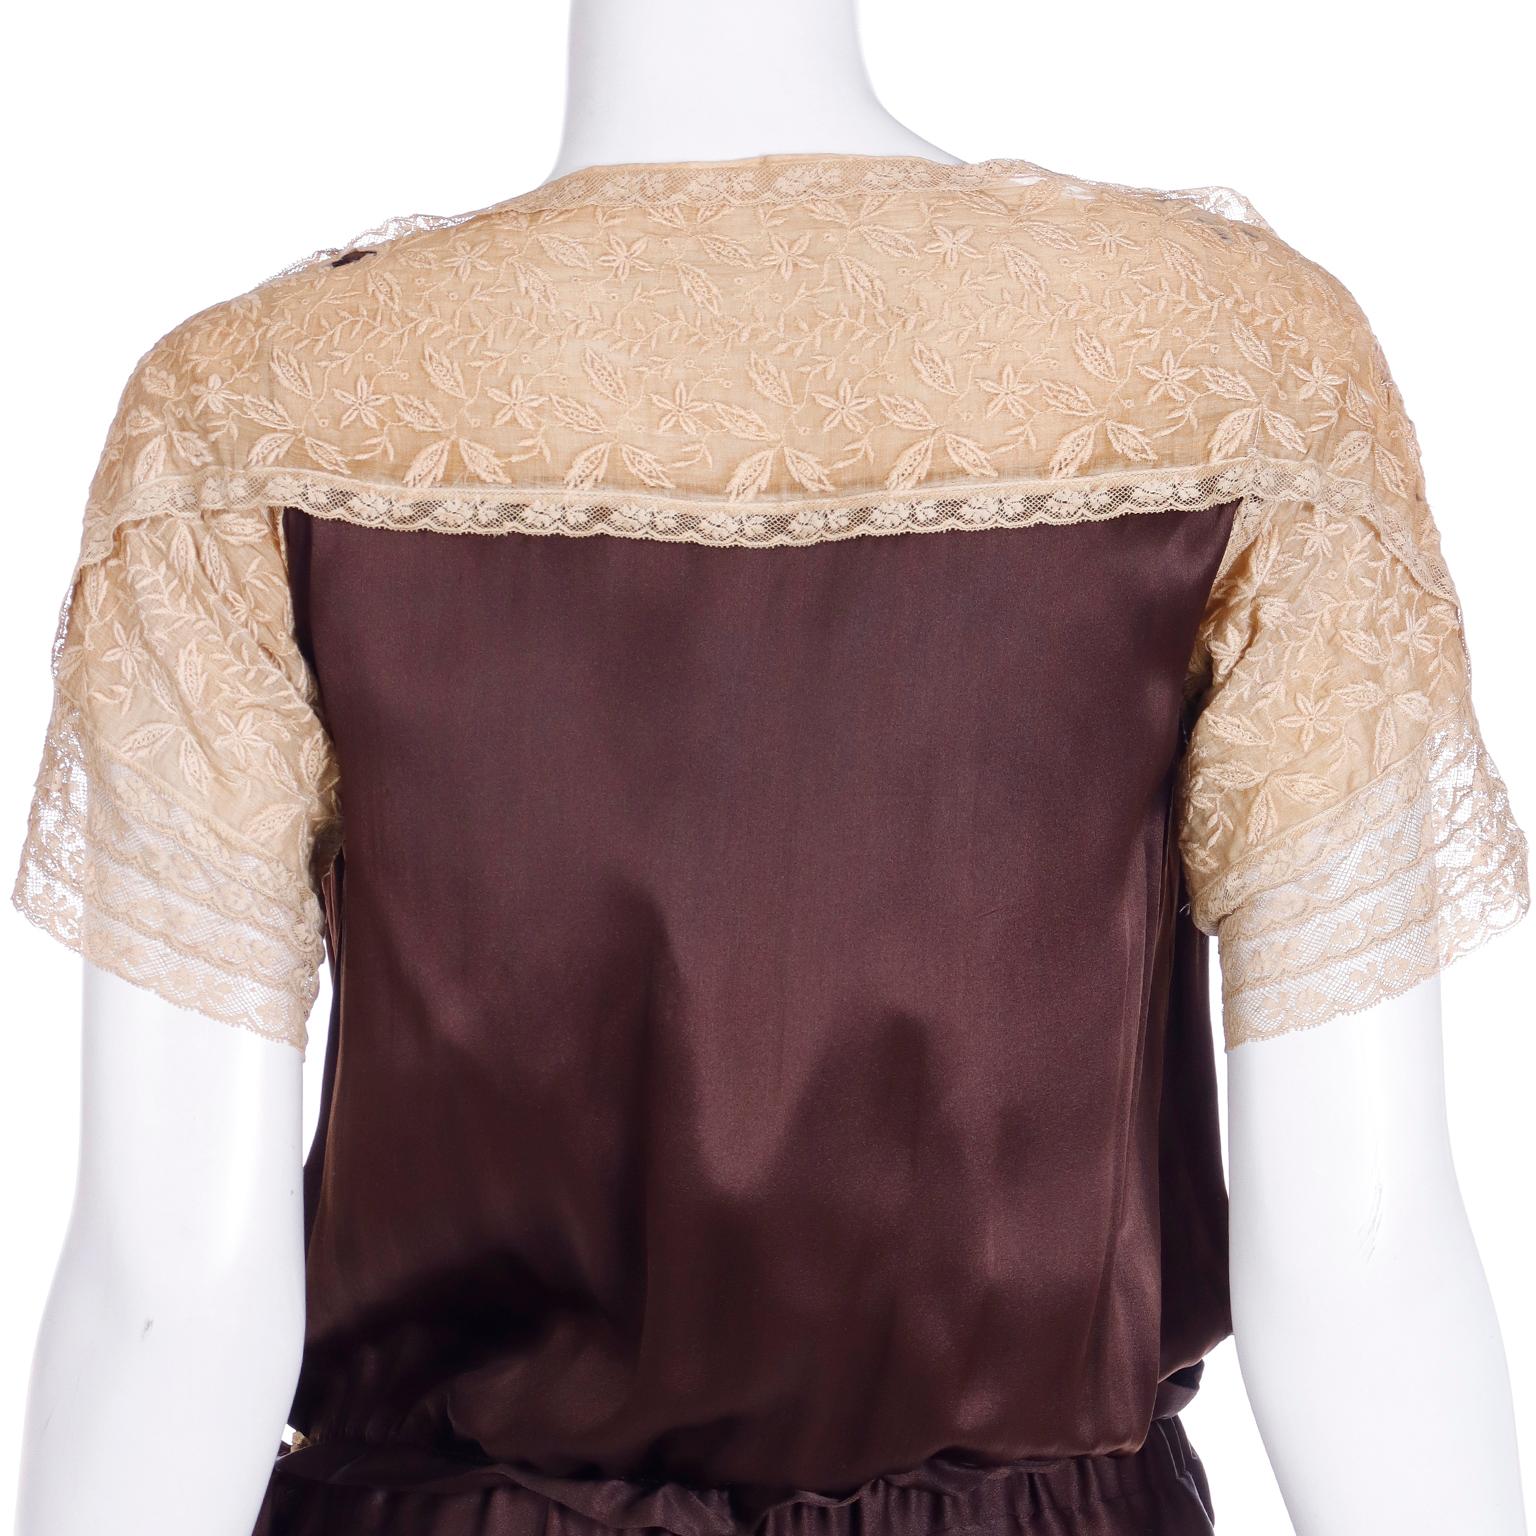 Vintage 1920s Brown Horizontally Pleated Silk Dress With Lace Detail For Sale 4